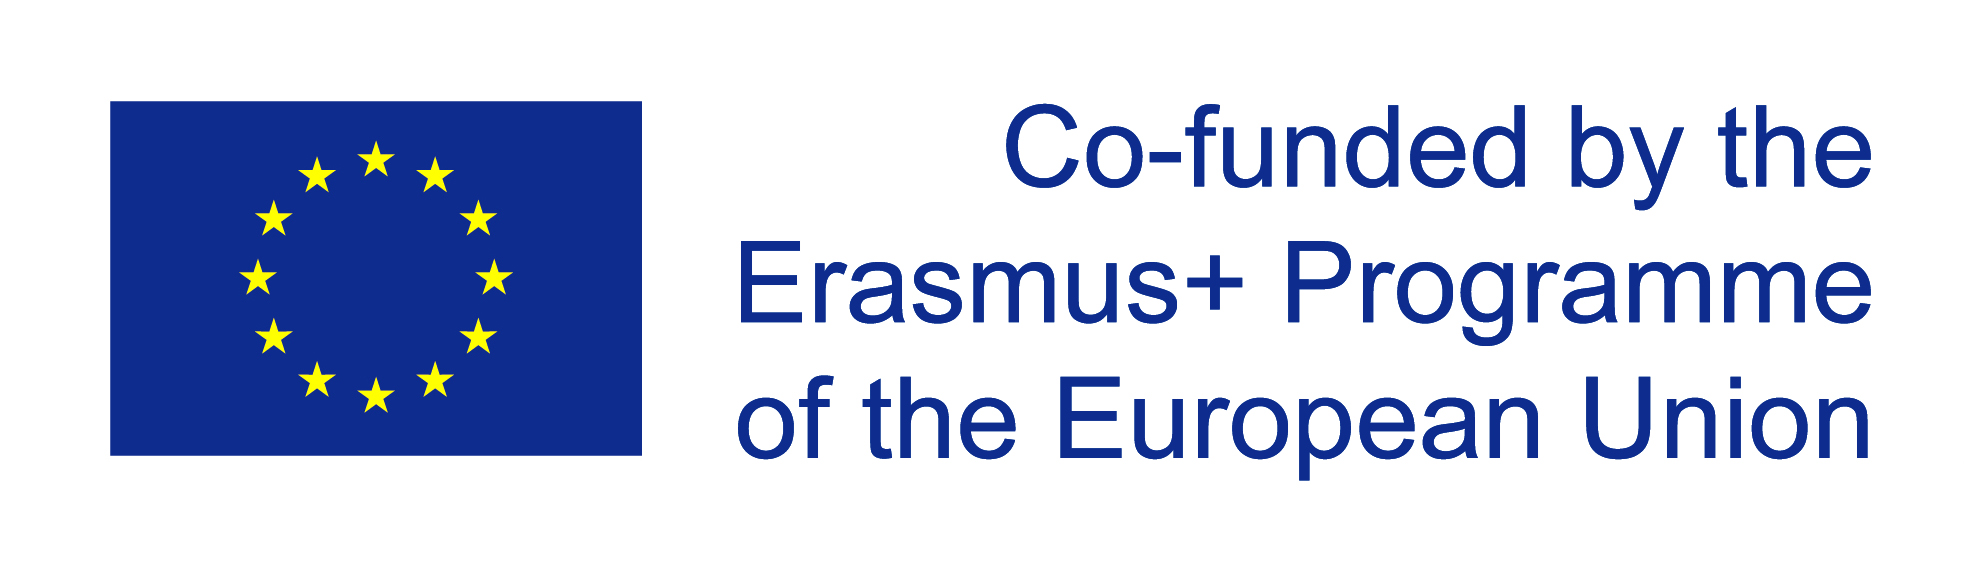 Co-funded by Erasmus+ Programme of the European Union